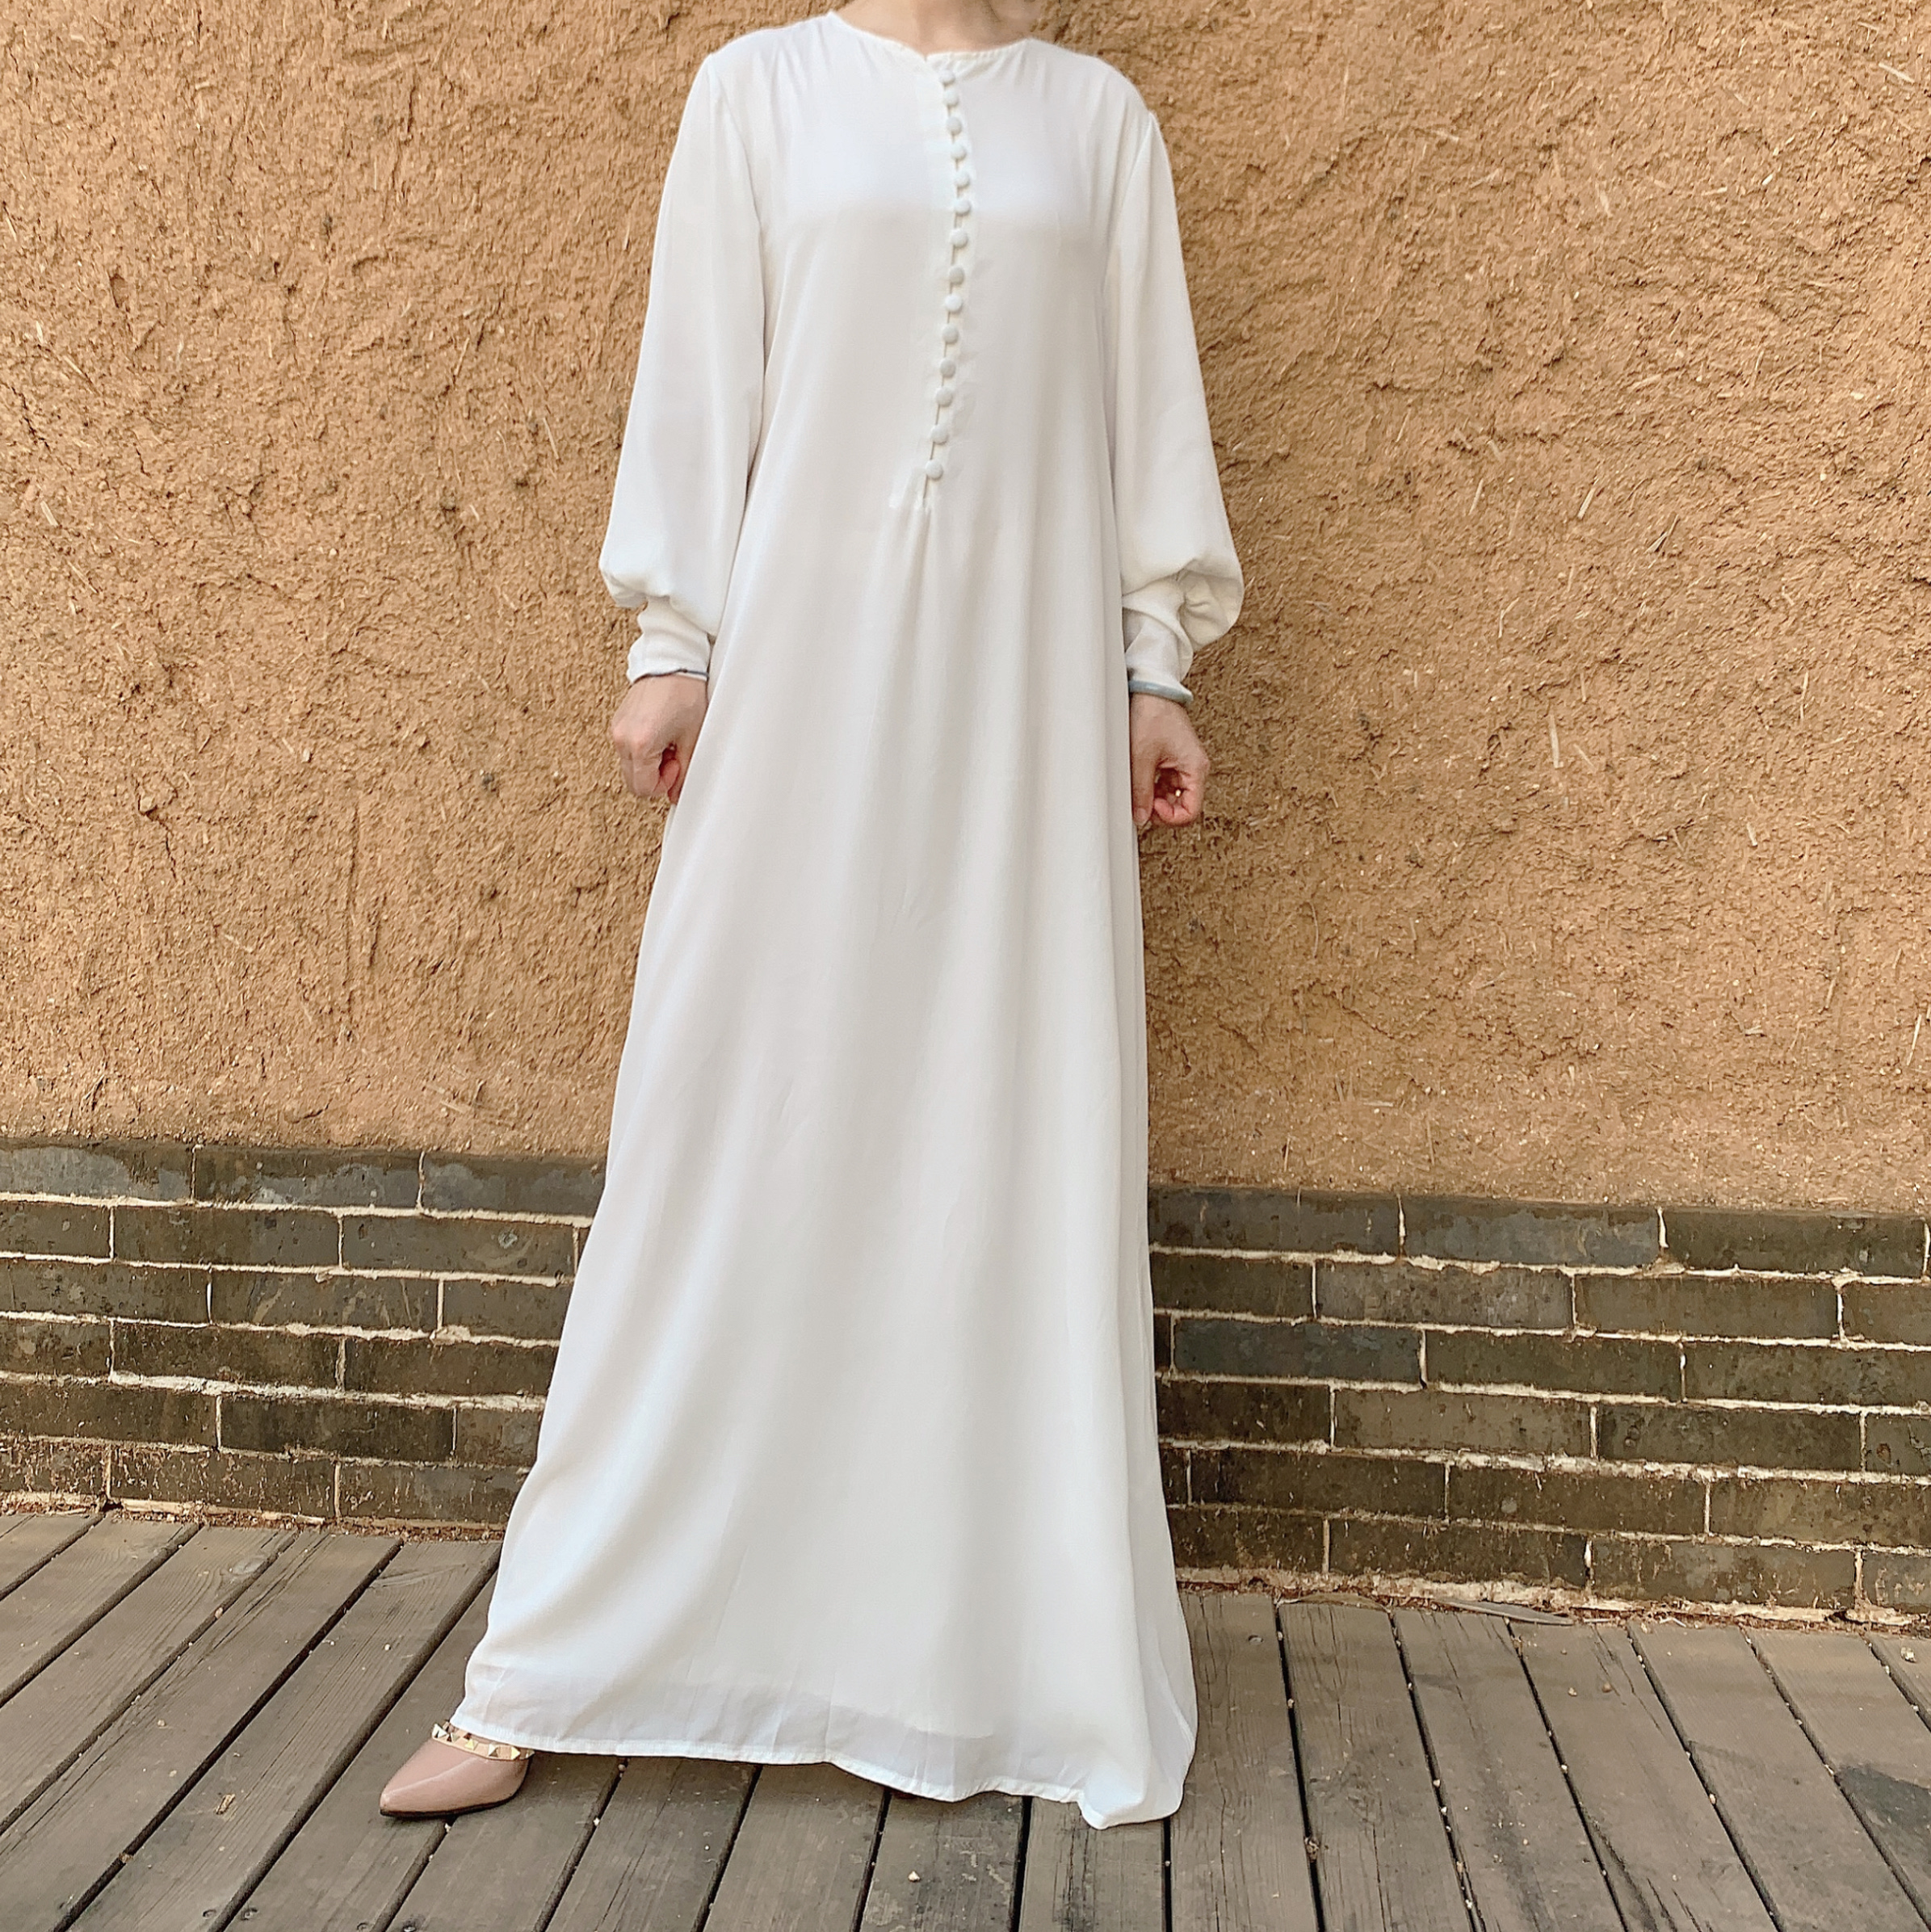 2021 New Arrival High Quality Solid color Heavy Chiffon French Style Fashion dress Islamic Clothing